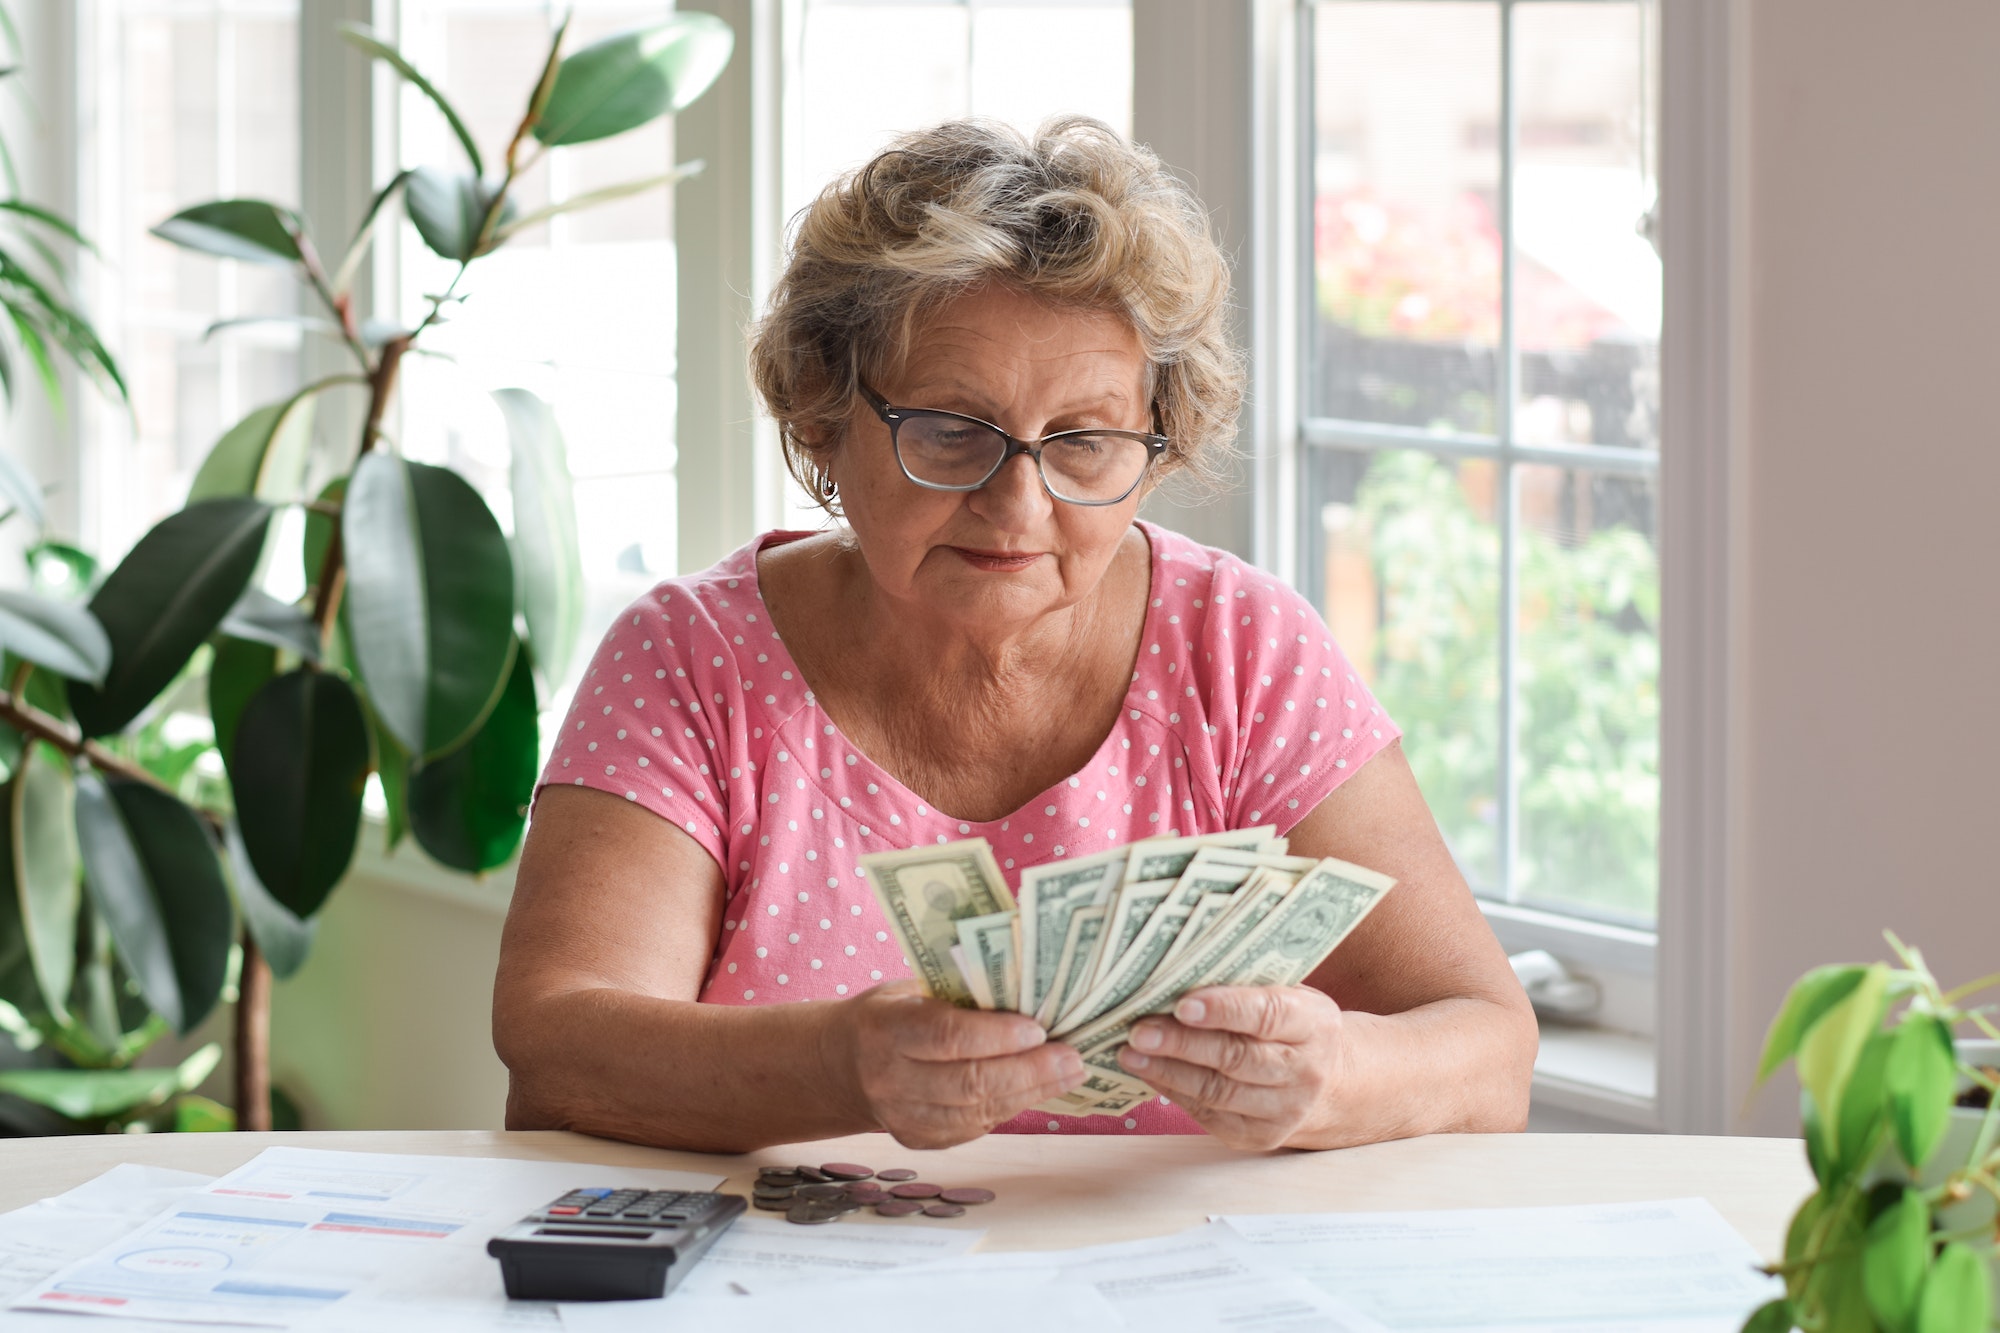 Senior woman sitting at desk counting money to pay bills